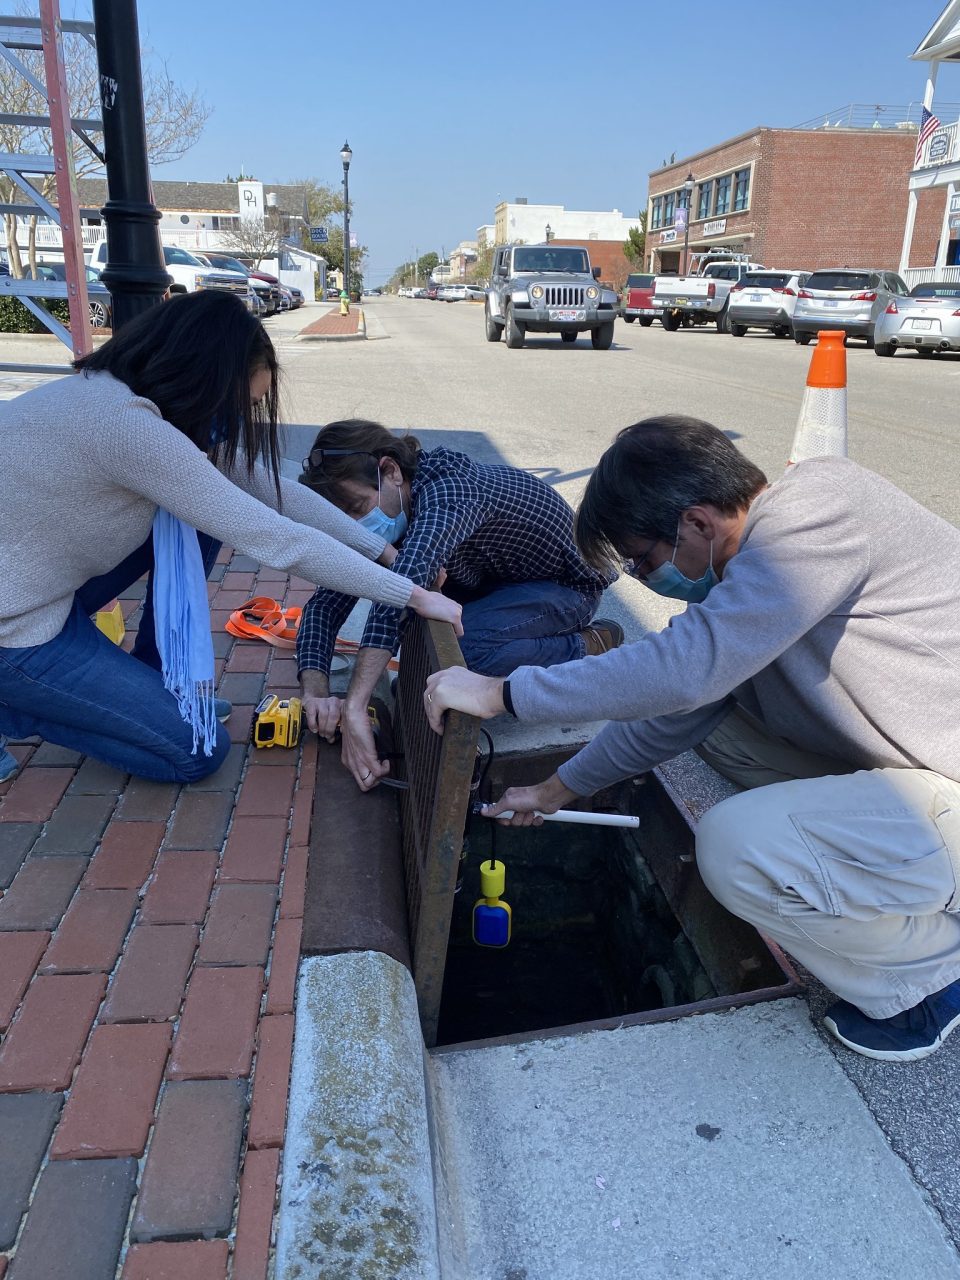 Researchers, from left, Dr. Miyuki Hino, Ryan Neve and Tony Whipple deploy a sensor in a Front Street storm drain in Beaufort in March 2021. Photo: K. Anarde/NCSU